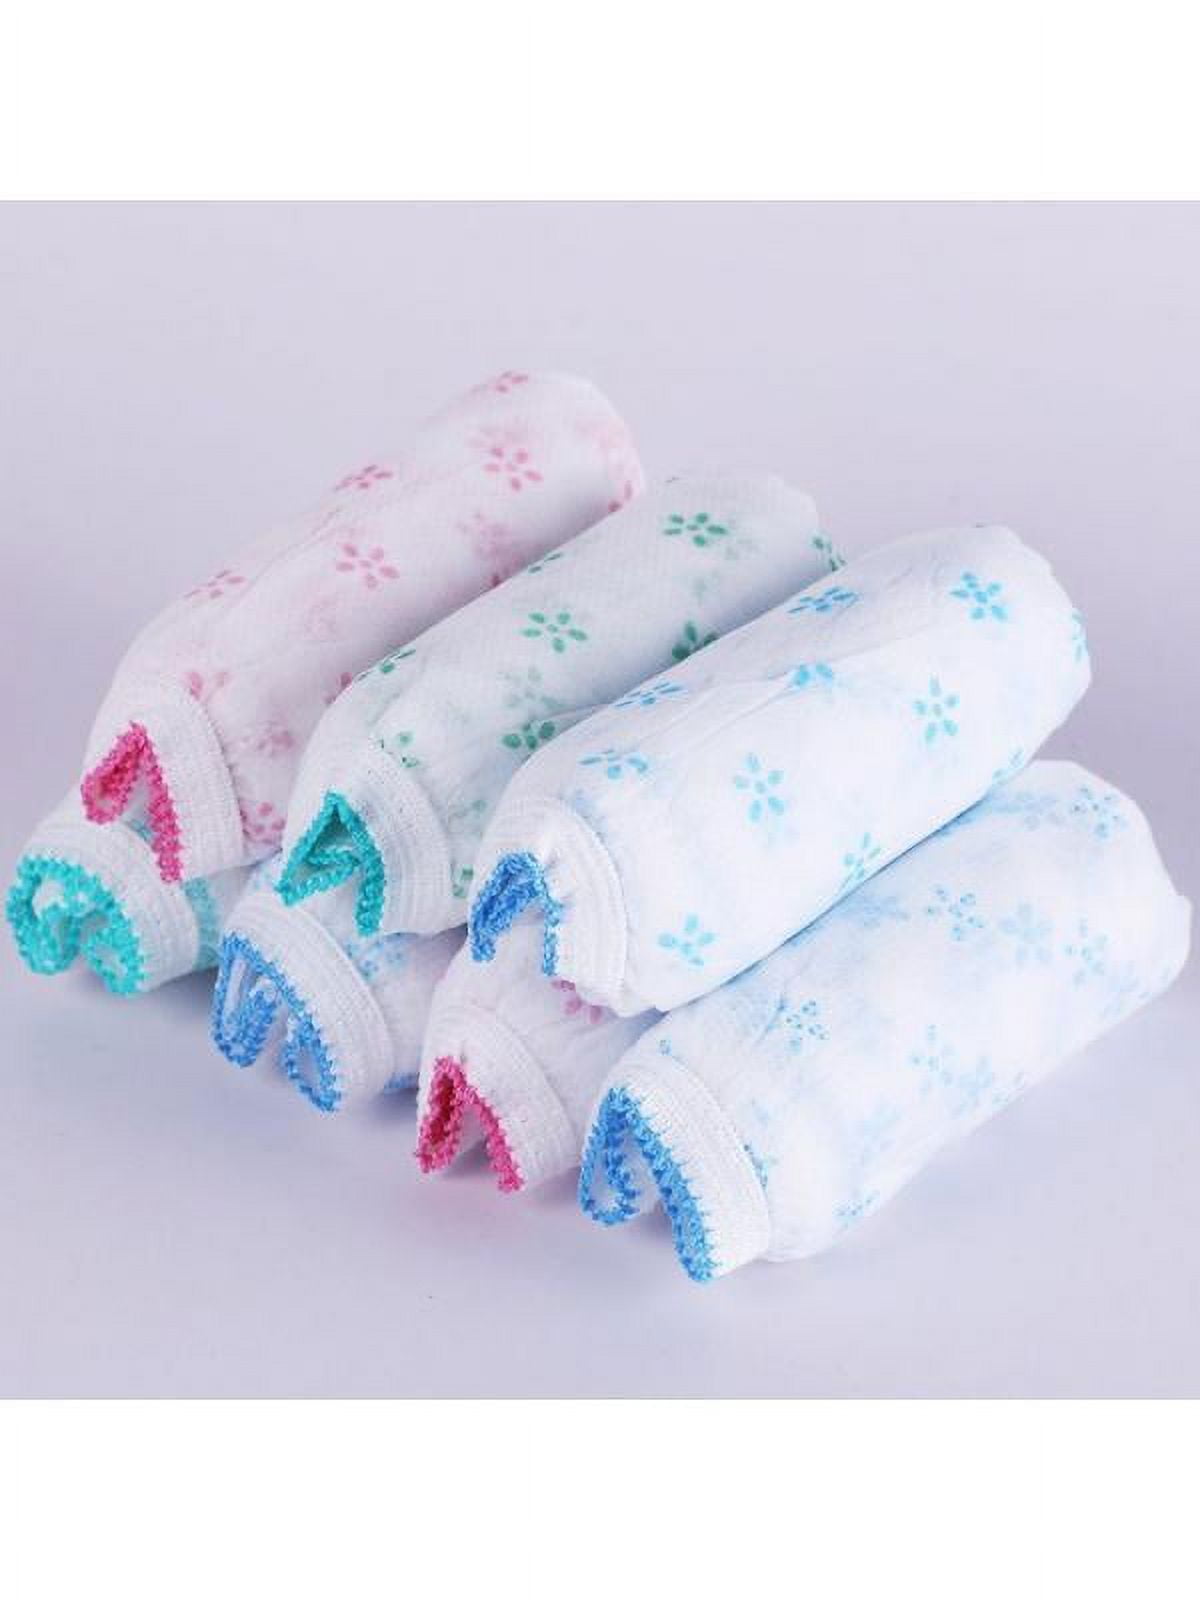 Disposable Panties For Women, Disposable Underwear, Pure Cotton, Sterile,  Suitable For Postpartum Maternity Travel, Free Shipping For New Users